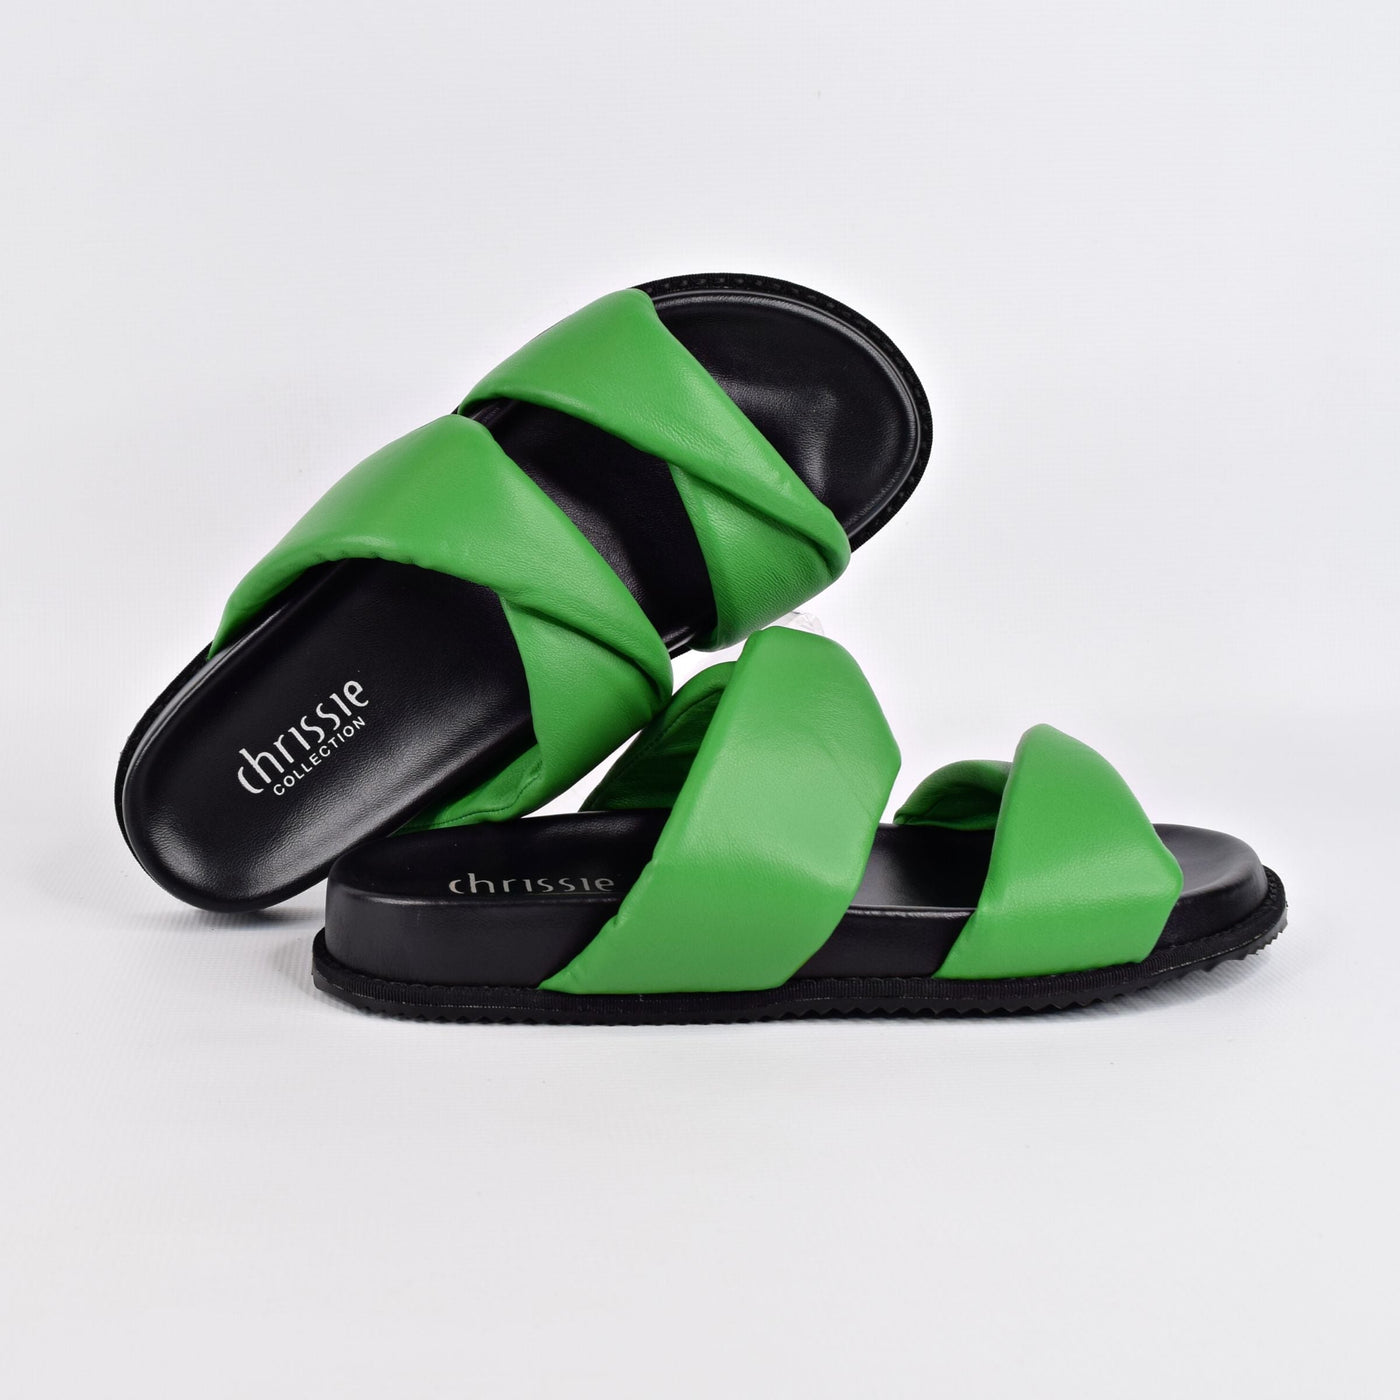 Believe Emerald by Chrissie | Womens Wide Fitting Slides by white back drop cushioned footbed